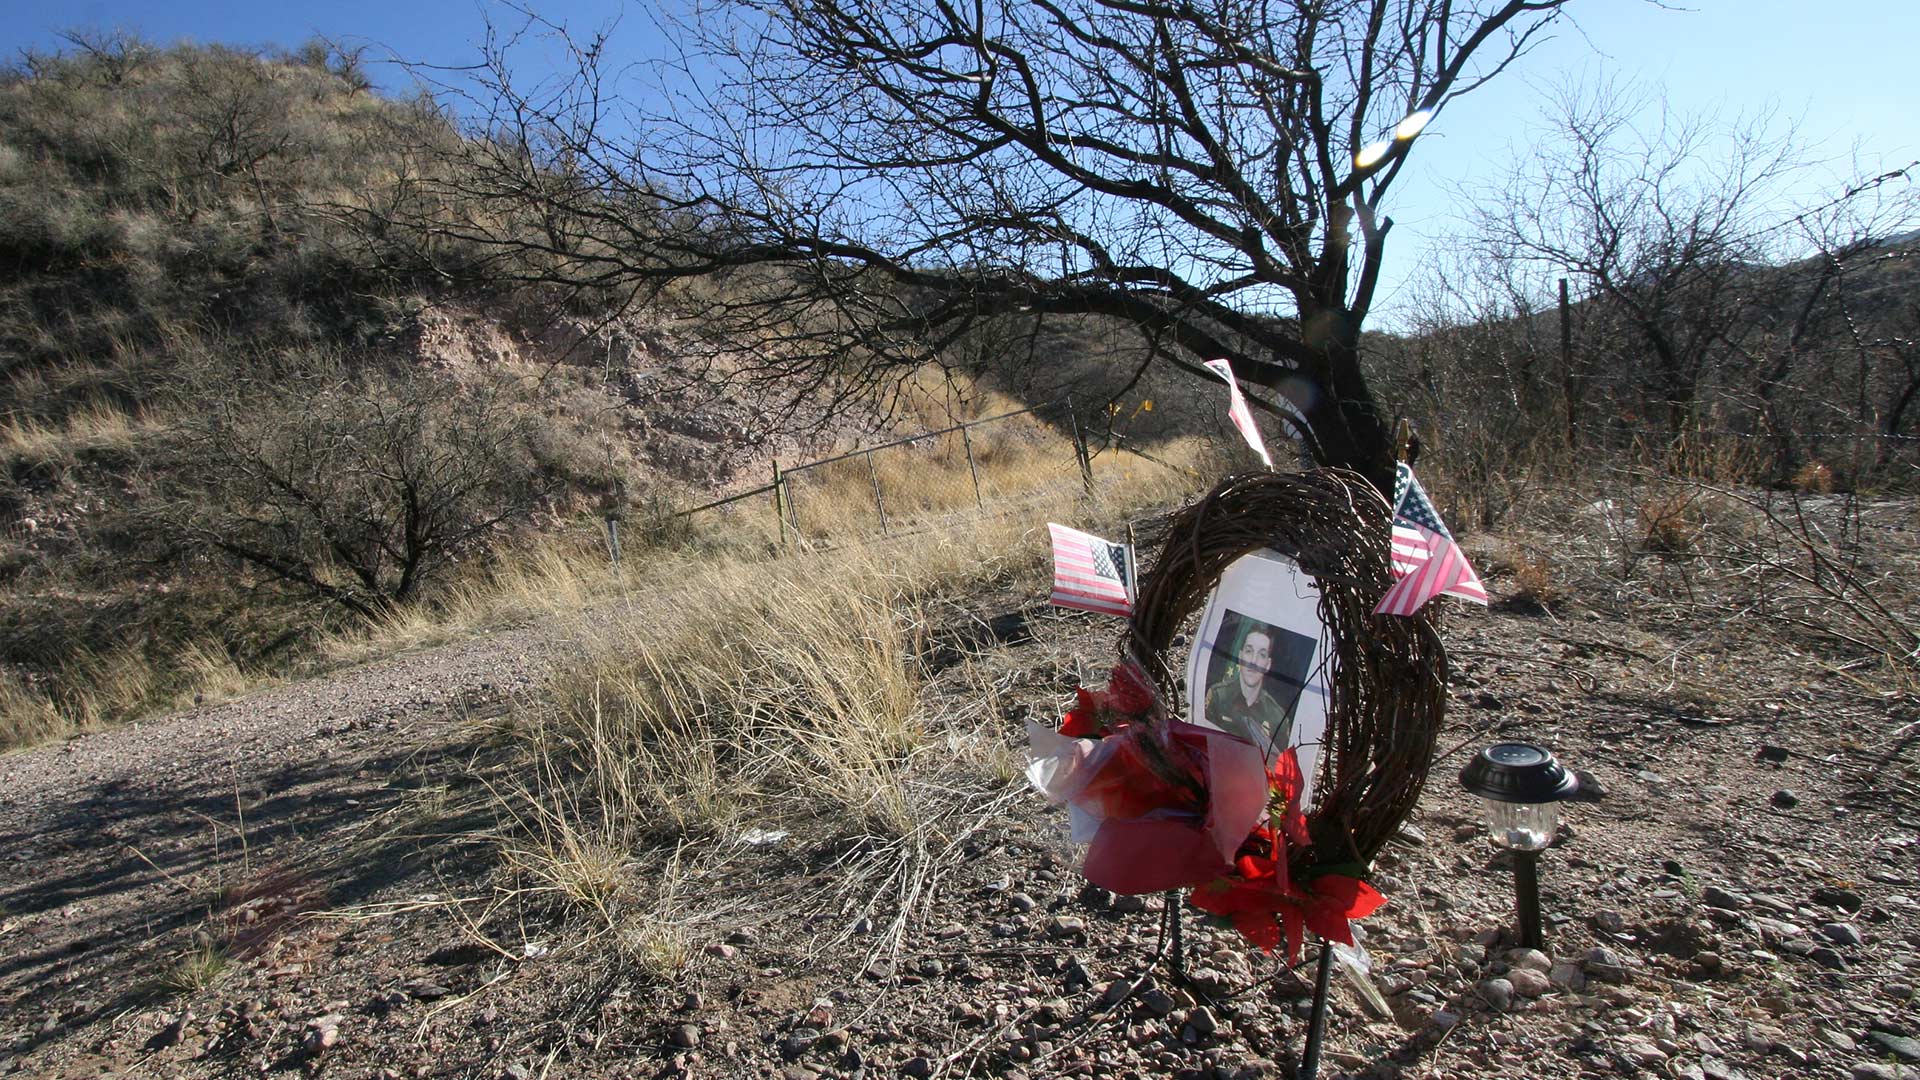 A makeshift memorial to murdered U.S. Border Patrol Agent Brian Terry in Southern Arizona.